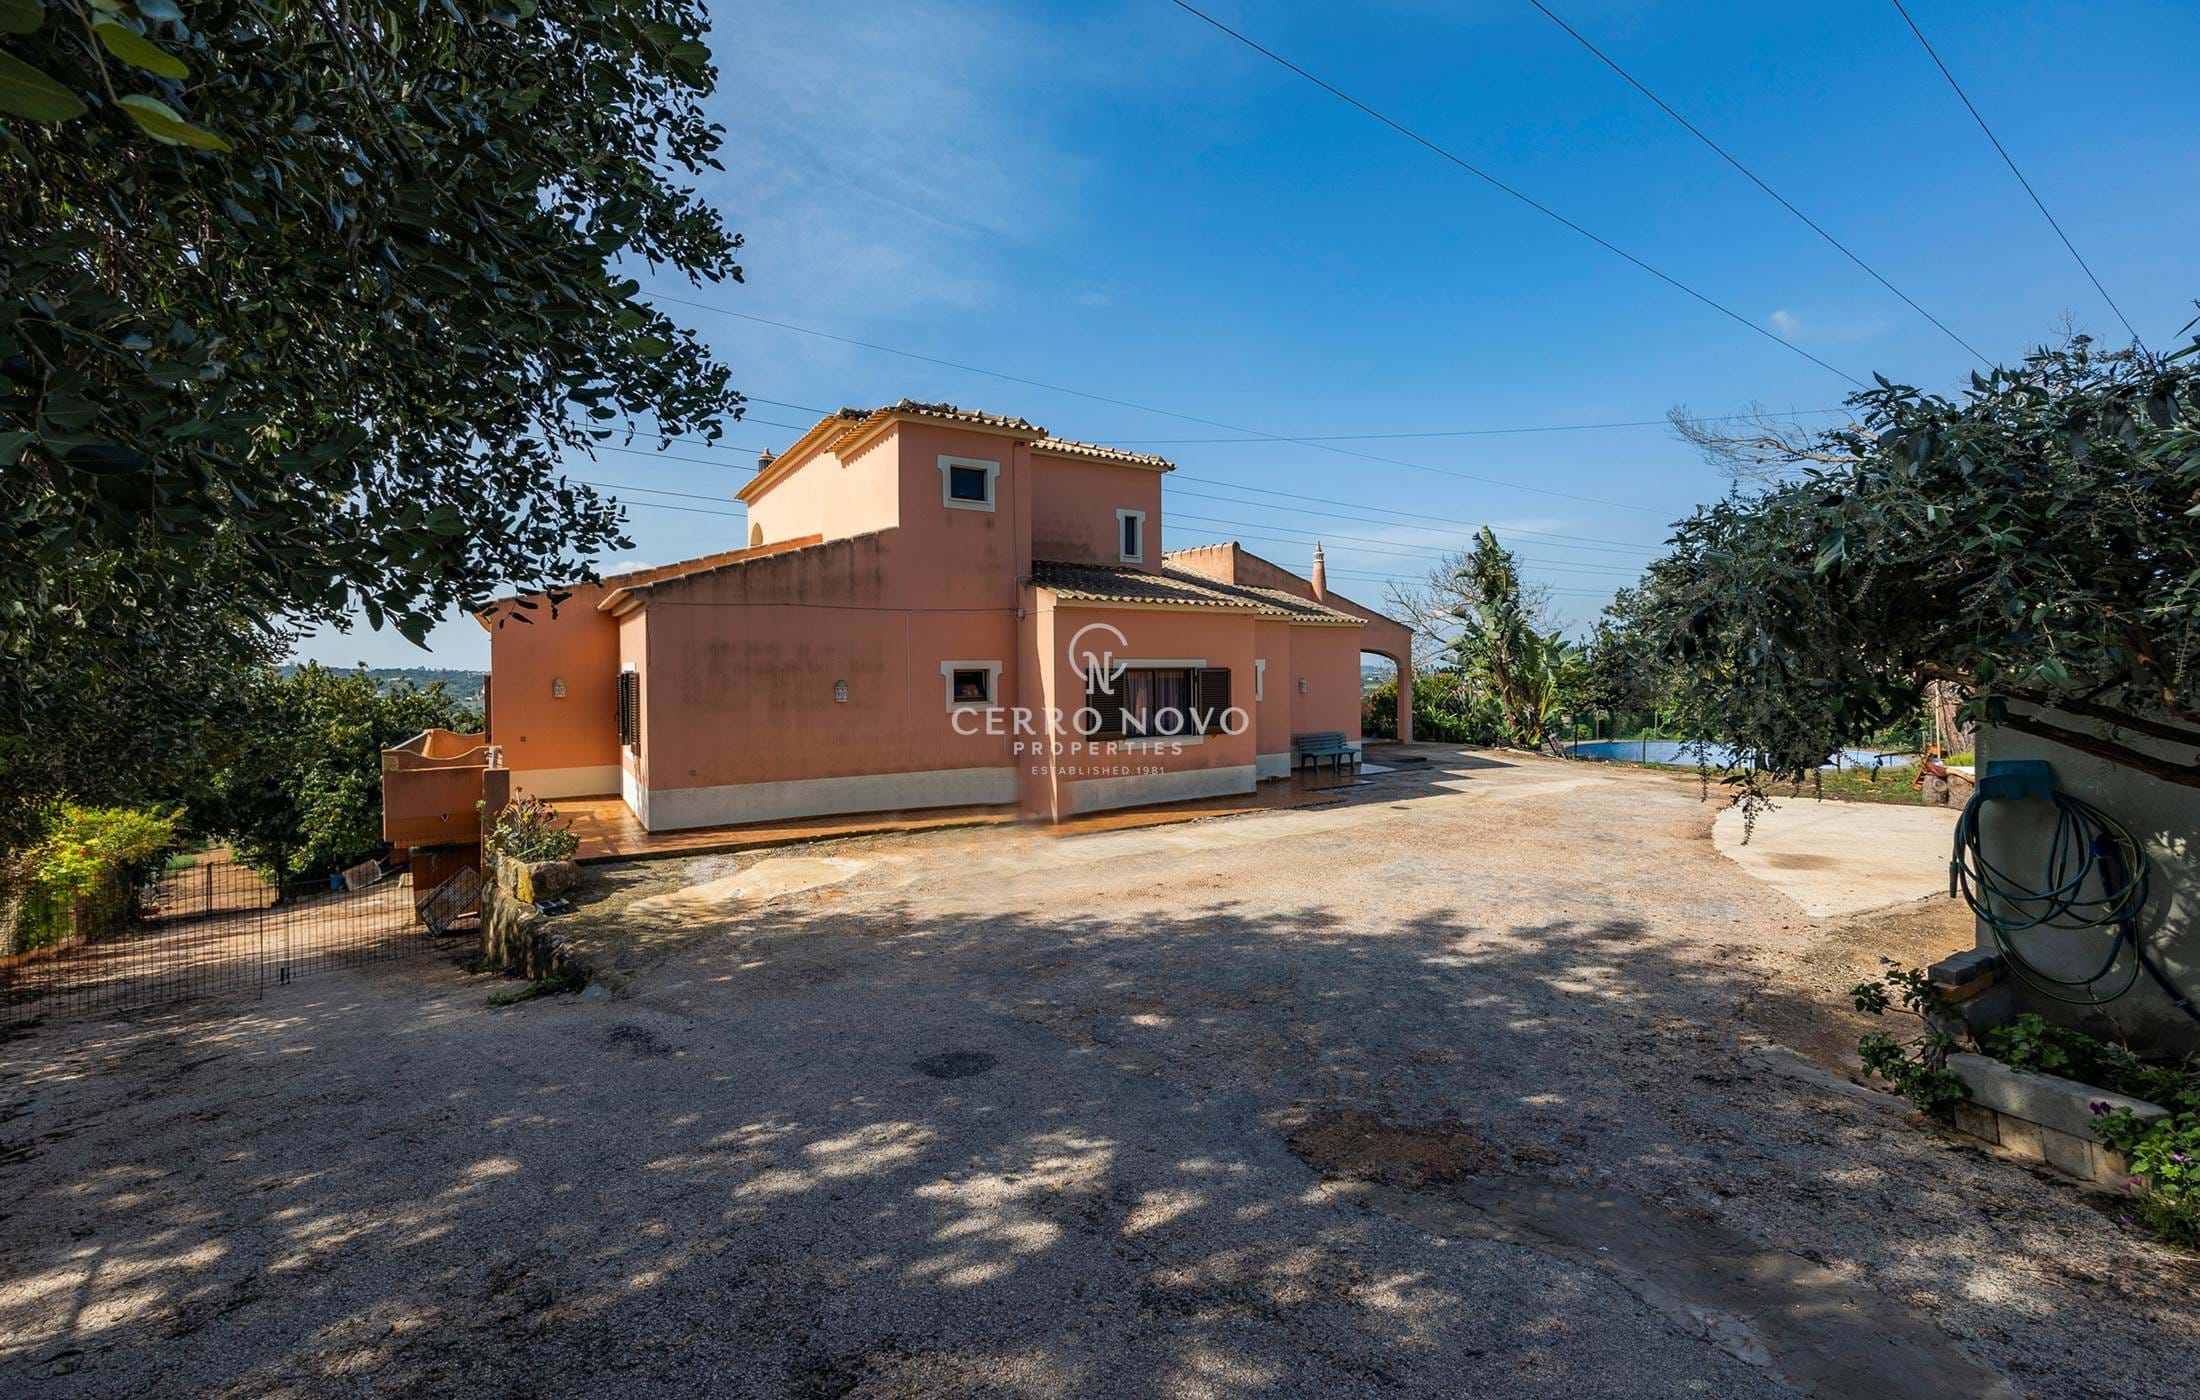 A large family property amidst the orange groves of Algoz